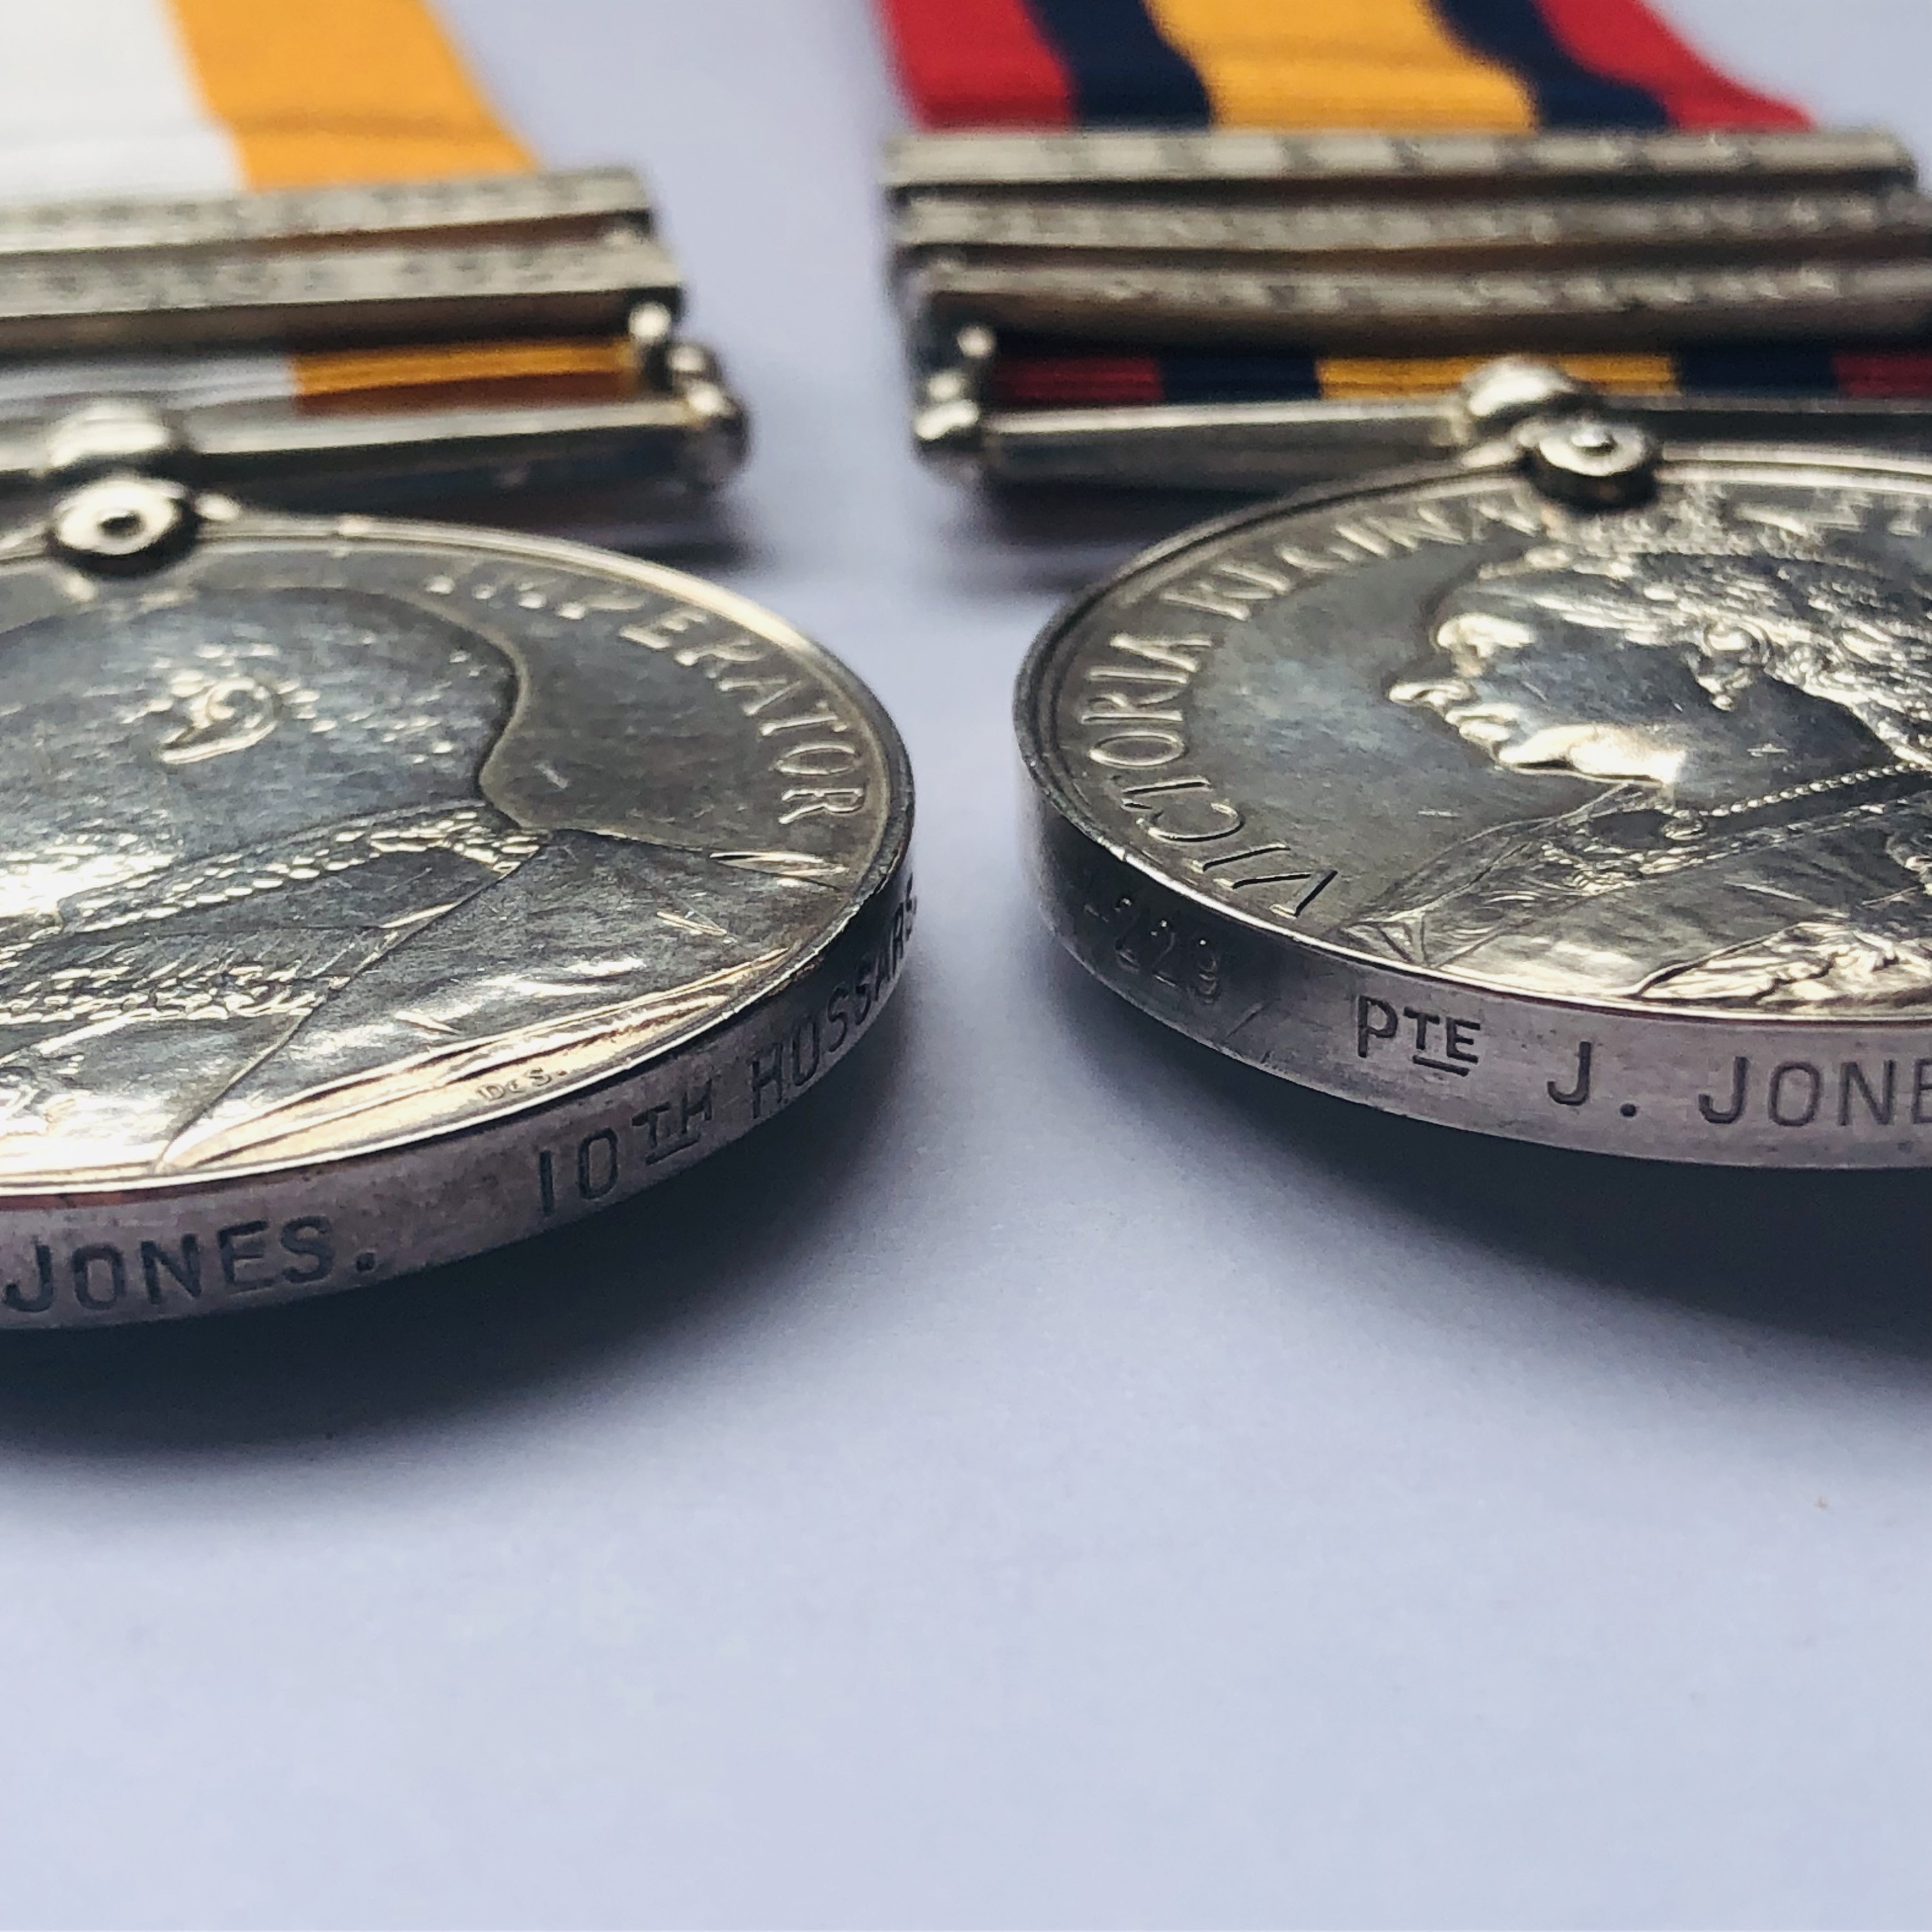 Queen's and King's South Africa Medals to 4229 Pte J Jones, 10th Hussars - Image 3 of 3